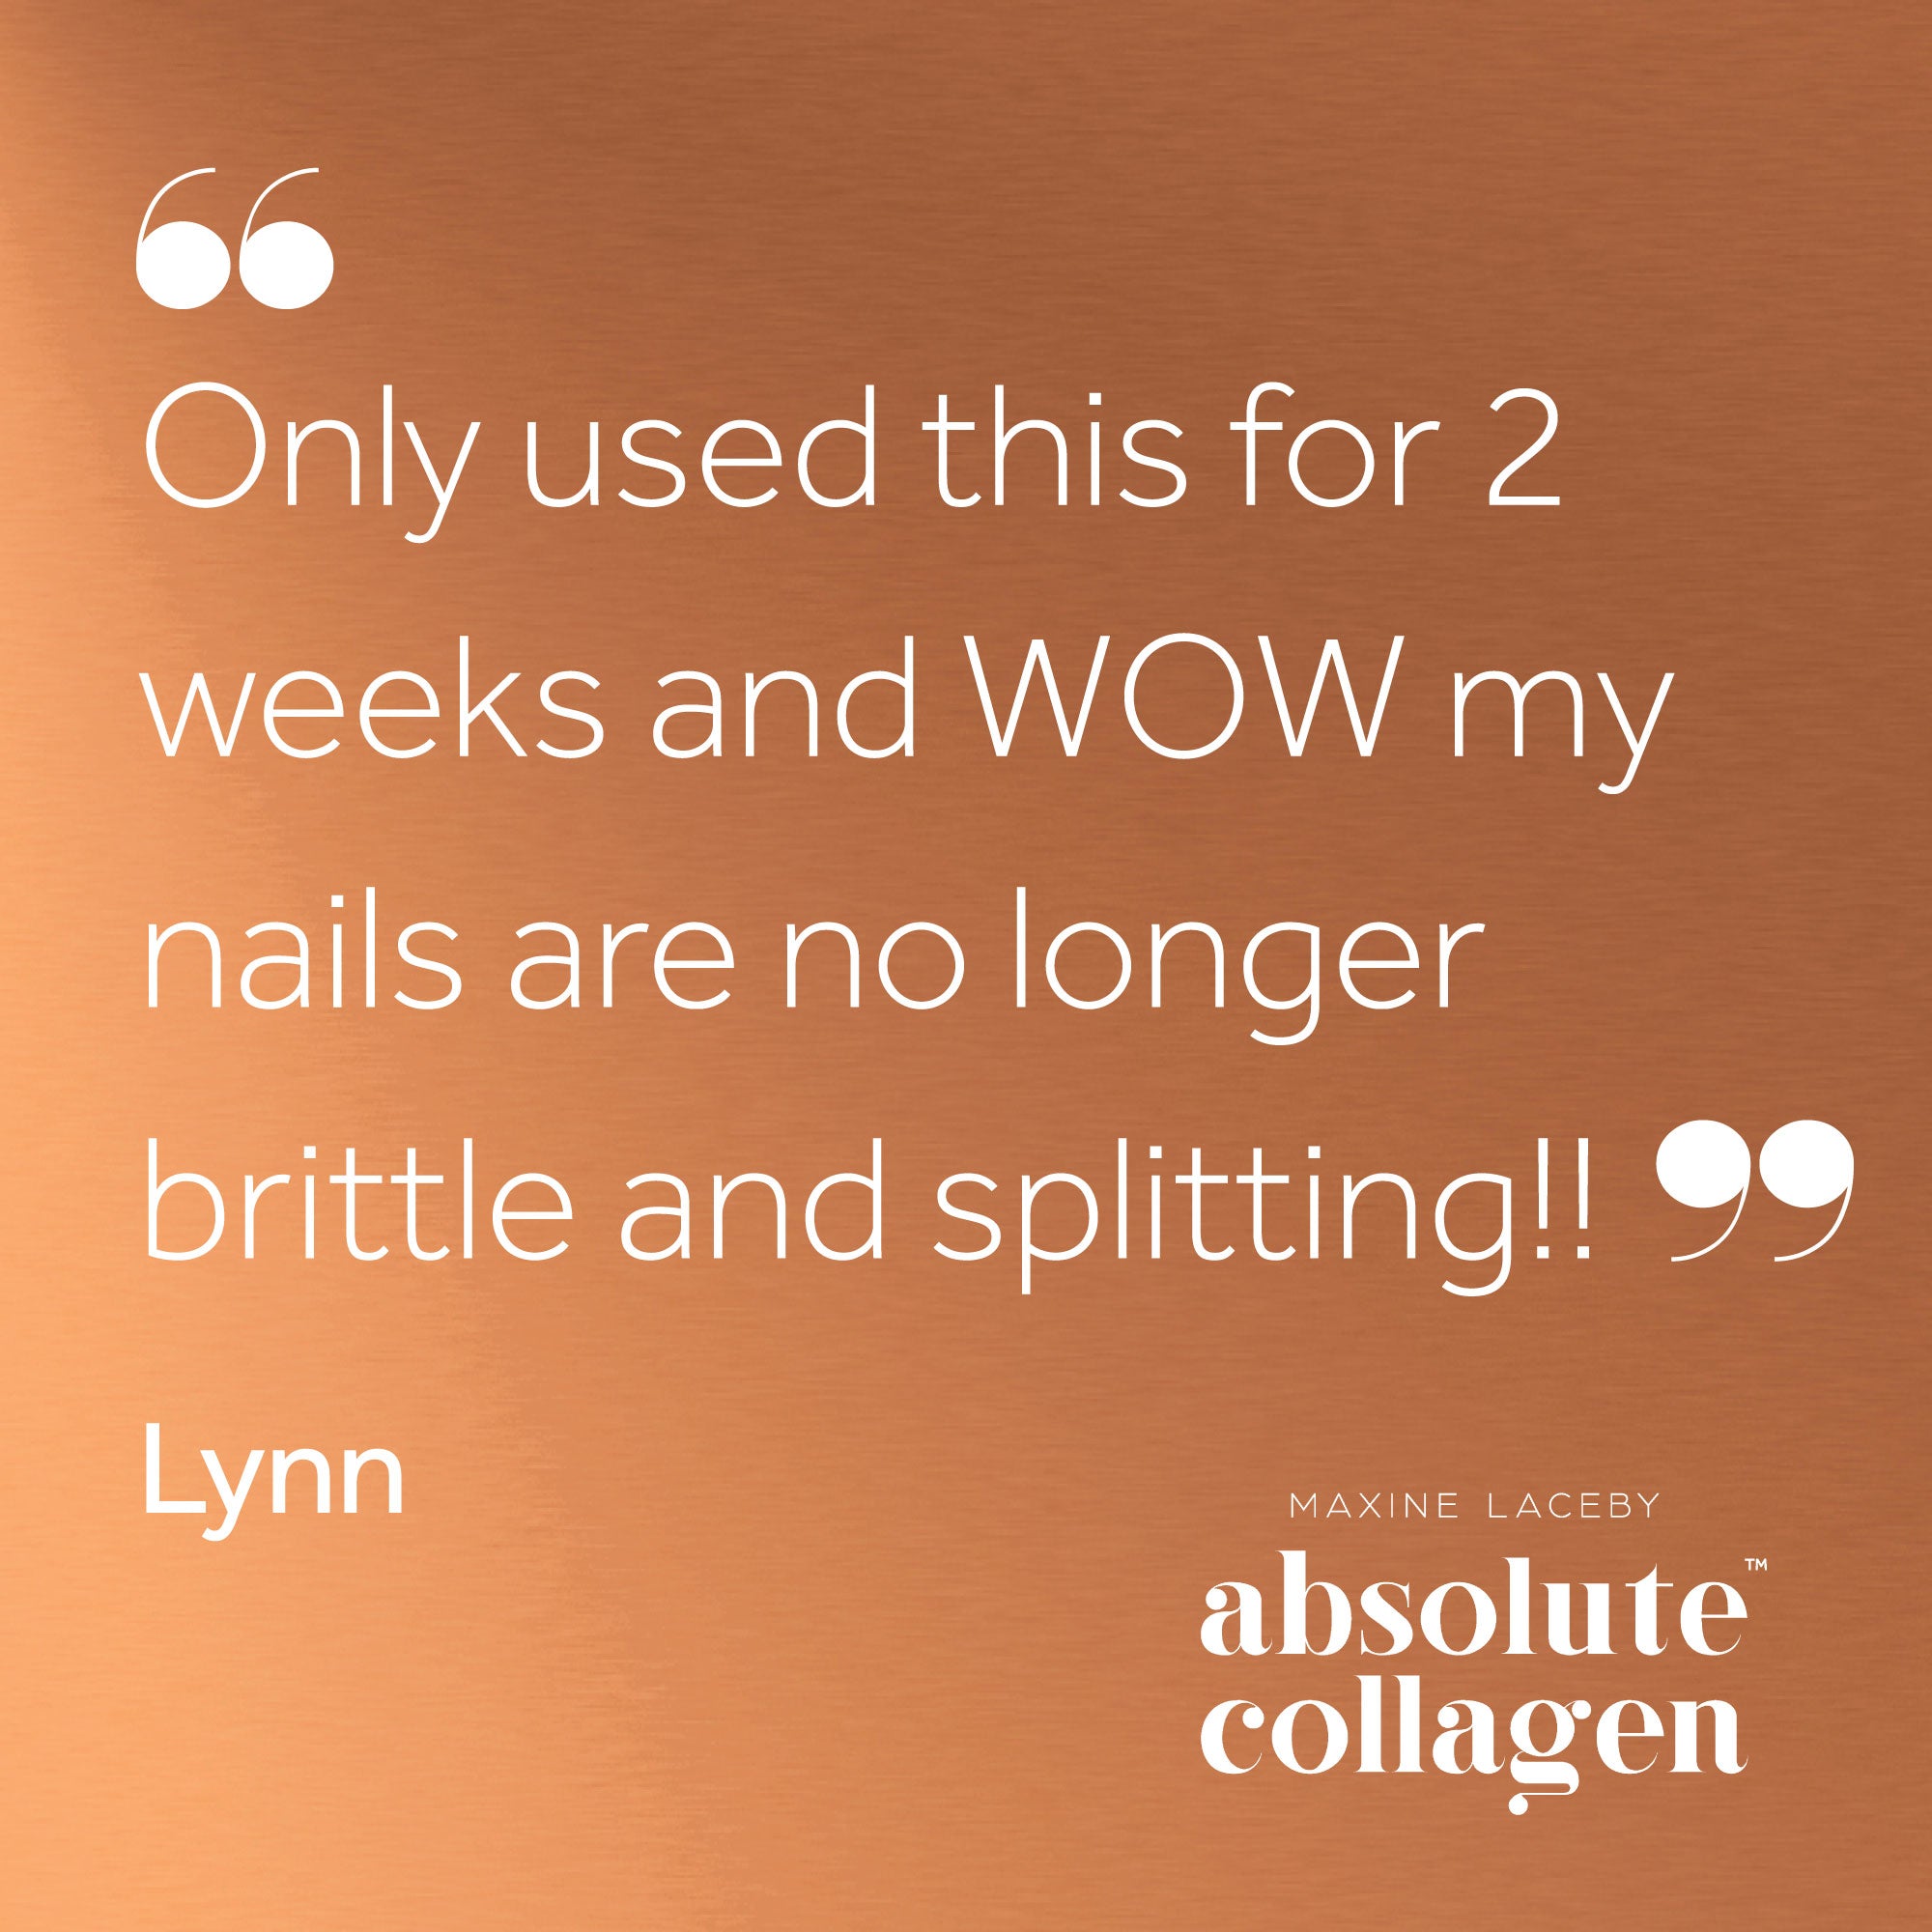 Quote from Lynn describing how Absolute Collagen helped her nails